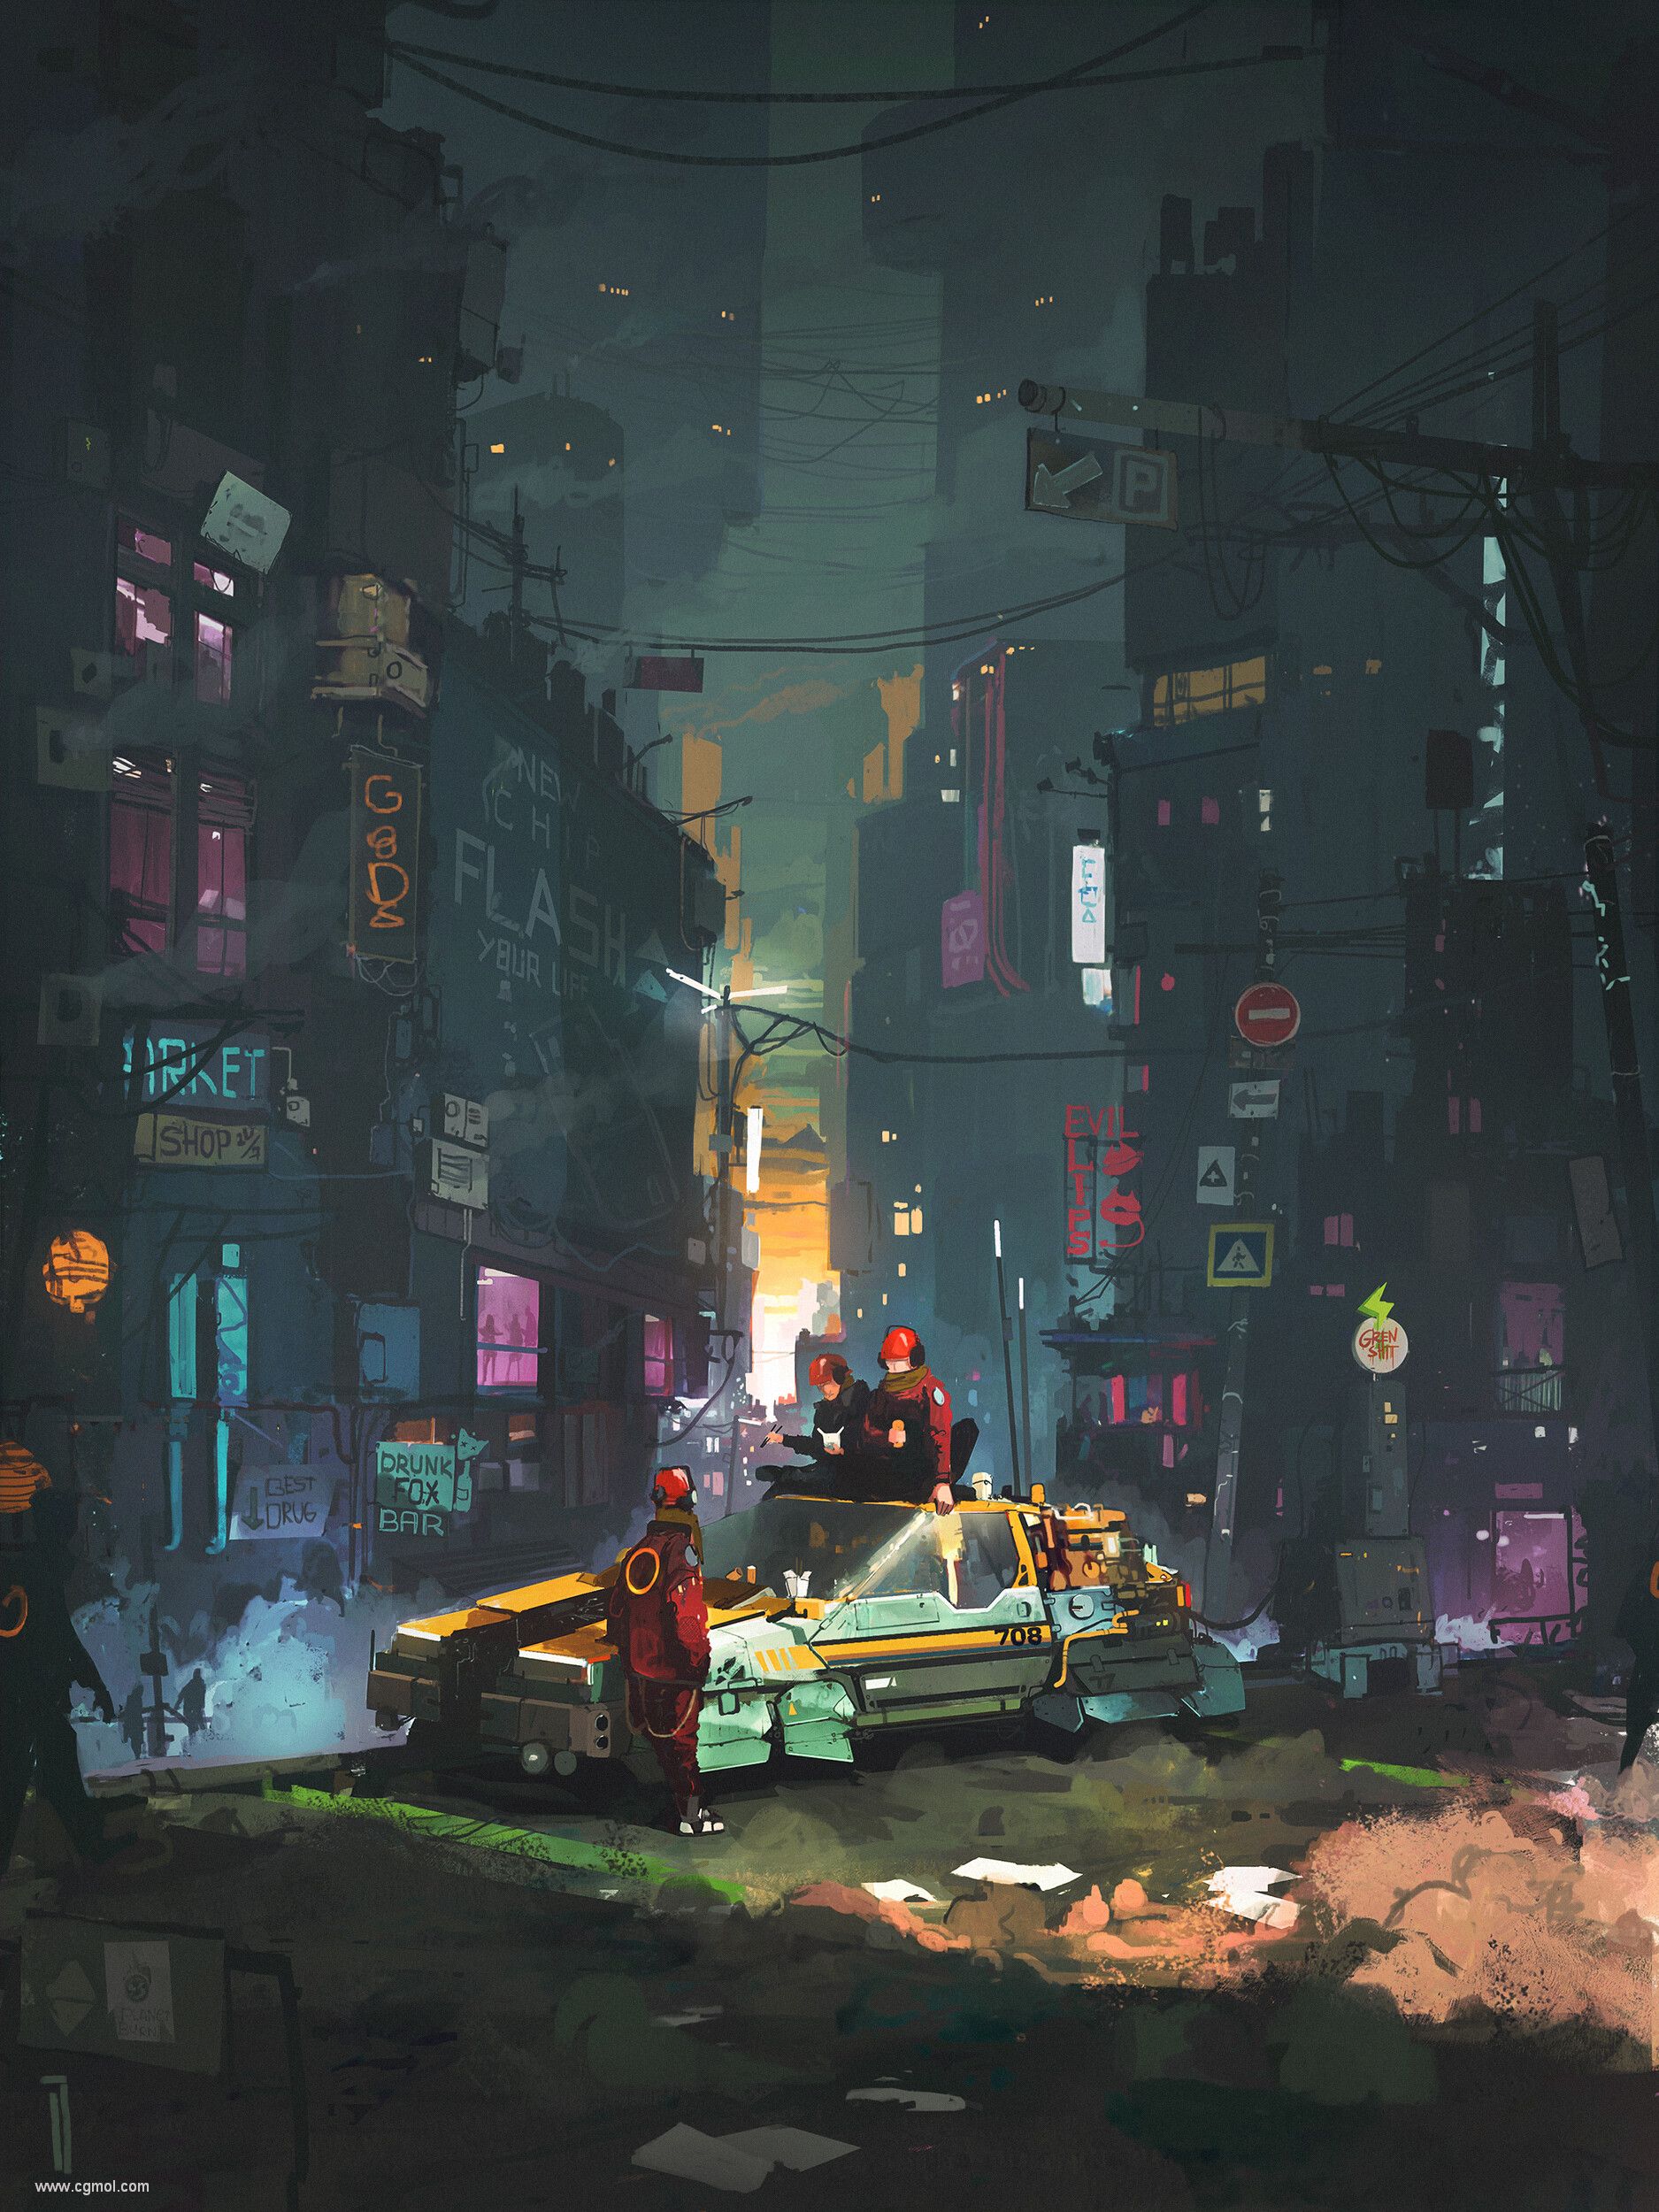 ismail-inceoglu-saving-the-planet